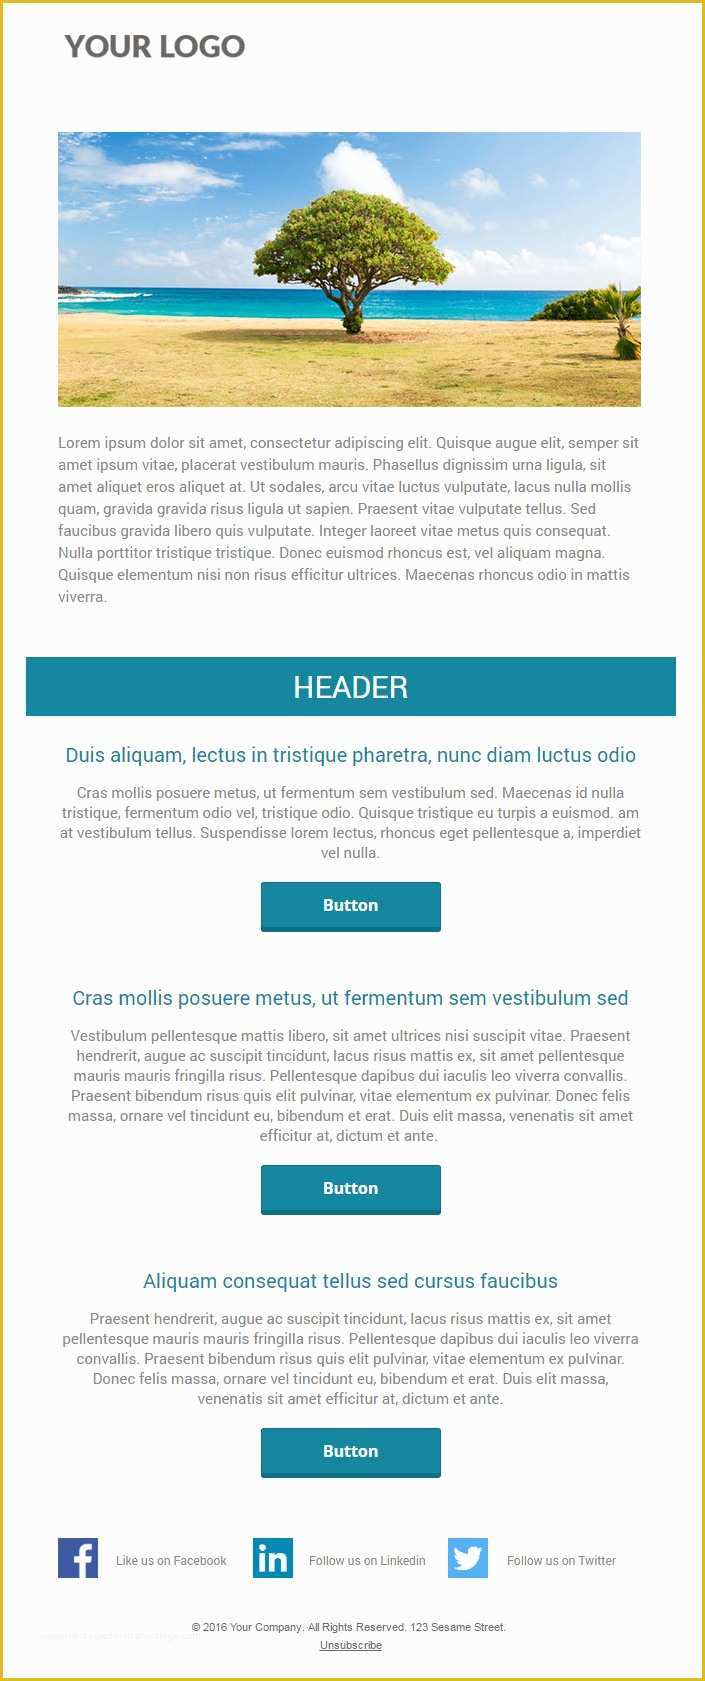 Free Responsive Email Templates 2017 Of 6 Free Responsive Marketo Email Templates